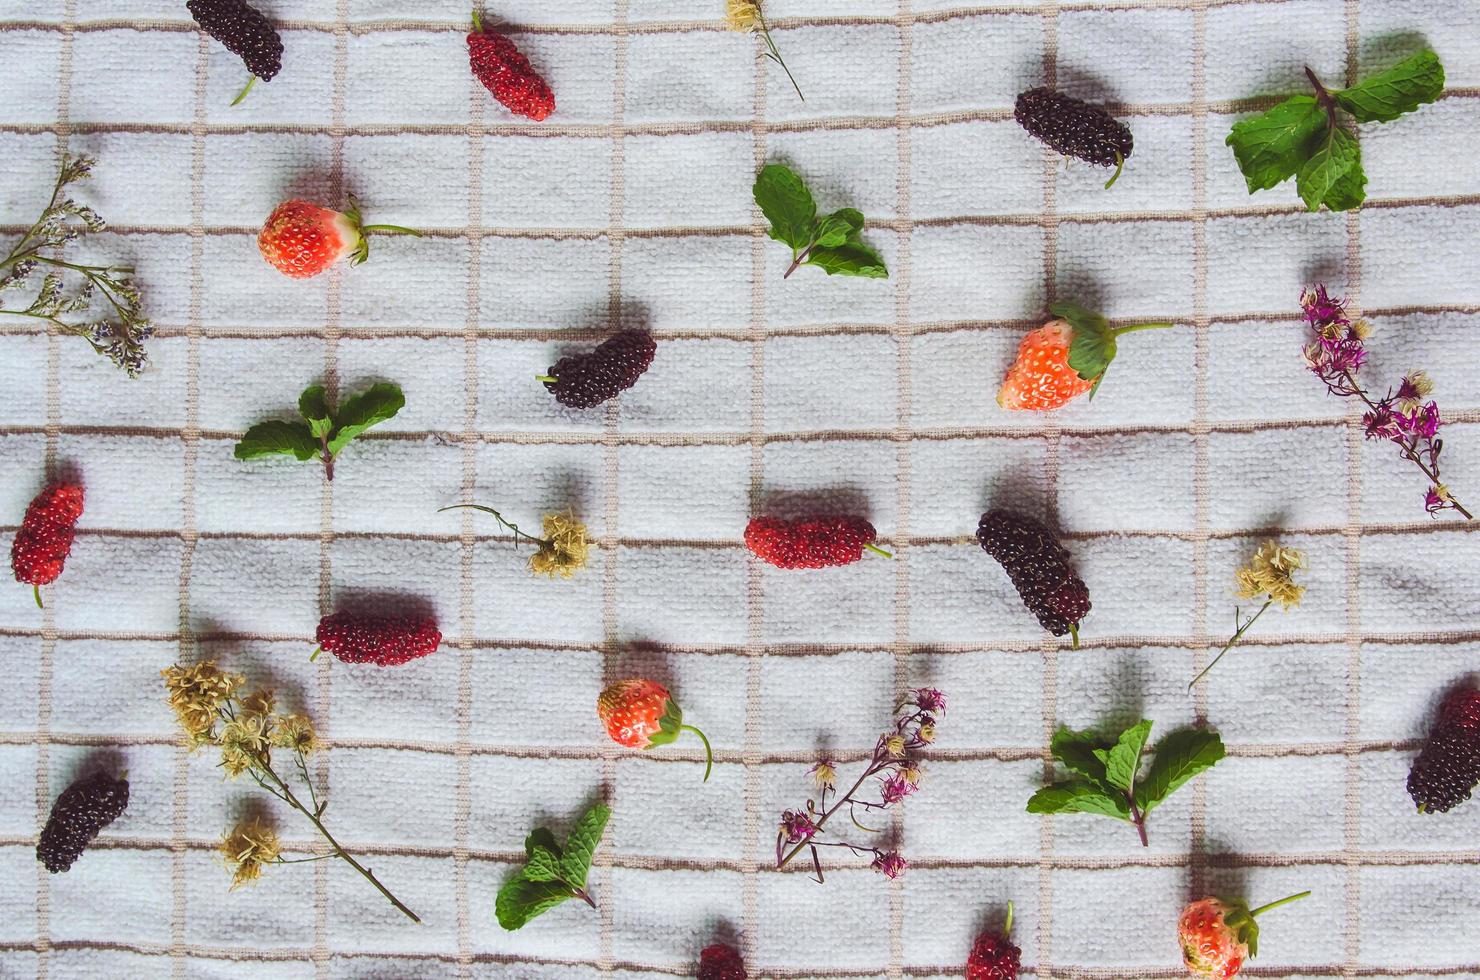 Mulberry fruit and strawberry, Fresh berry fruit on white fabric. photo